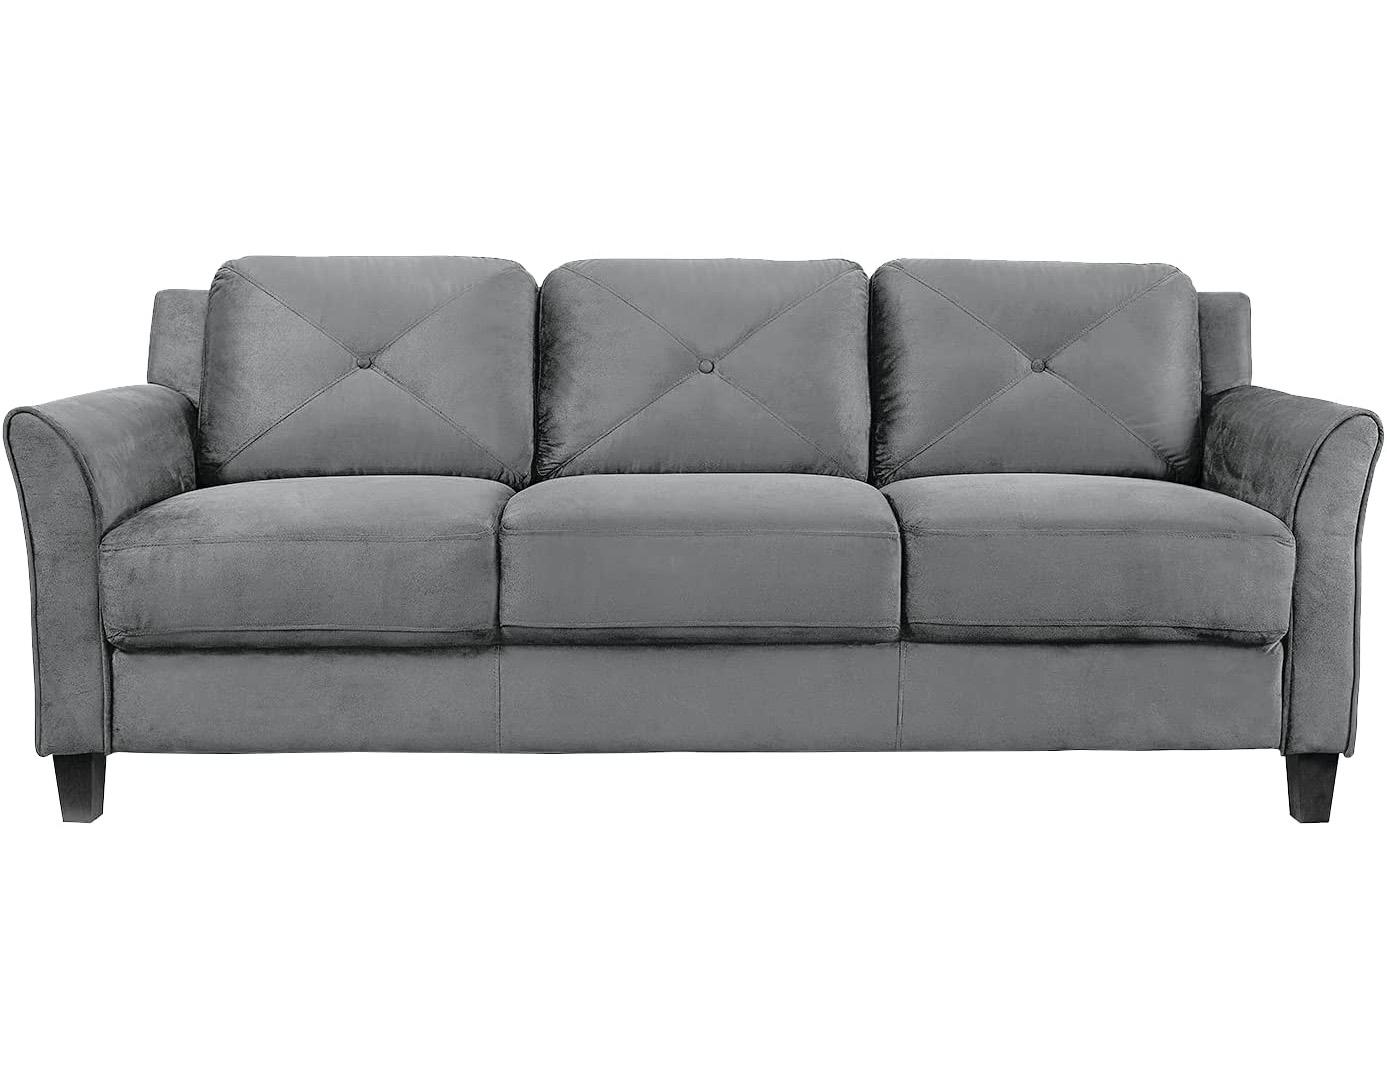 Lifestyle Solutions Collection Grayson Micro Fabric Sofa for $224.64 Shipped